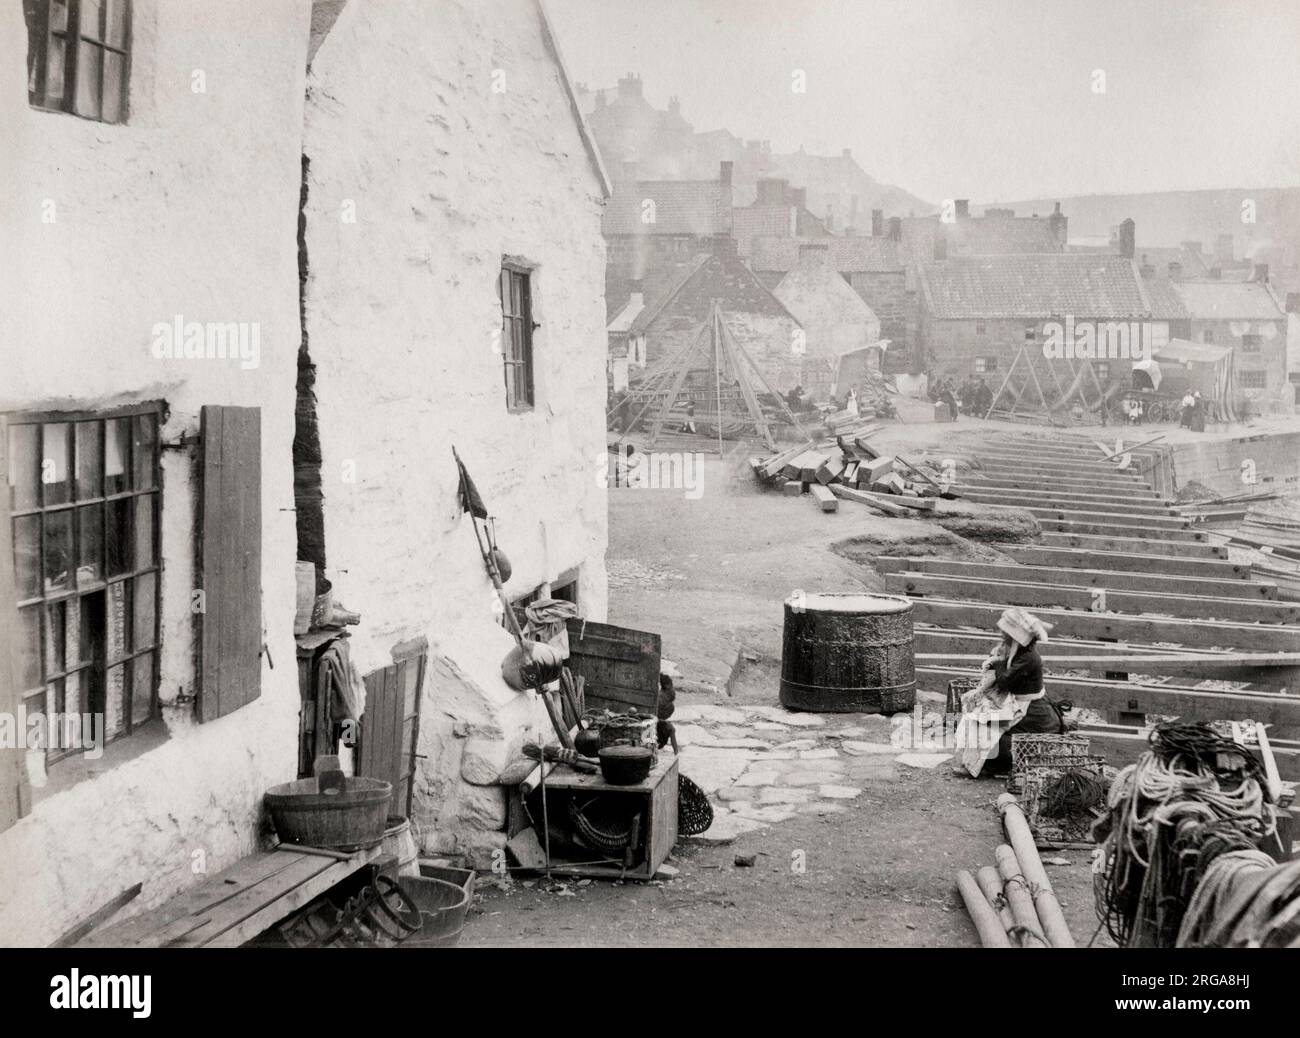 Buidling work along the seafront in the fishing village of Staithes, Yorkshire. Vintage 19th century photograph. Stock Photo